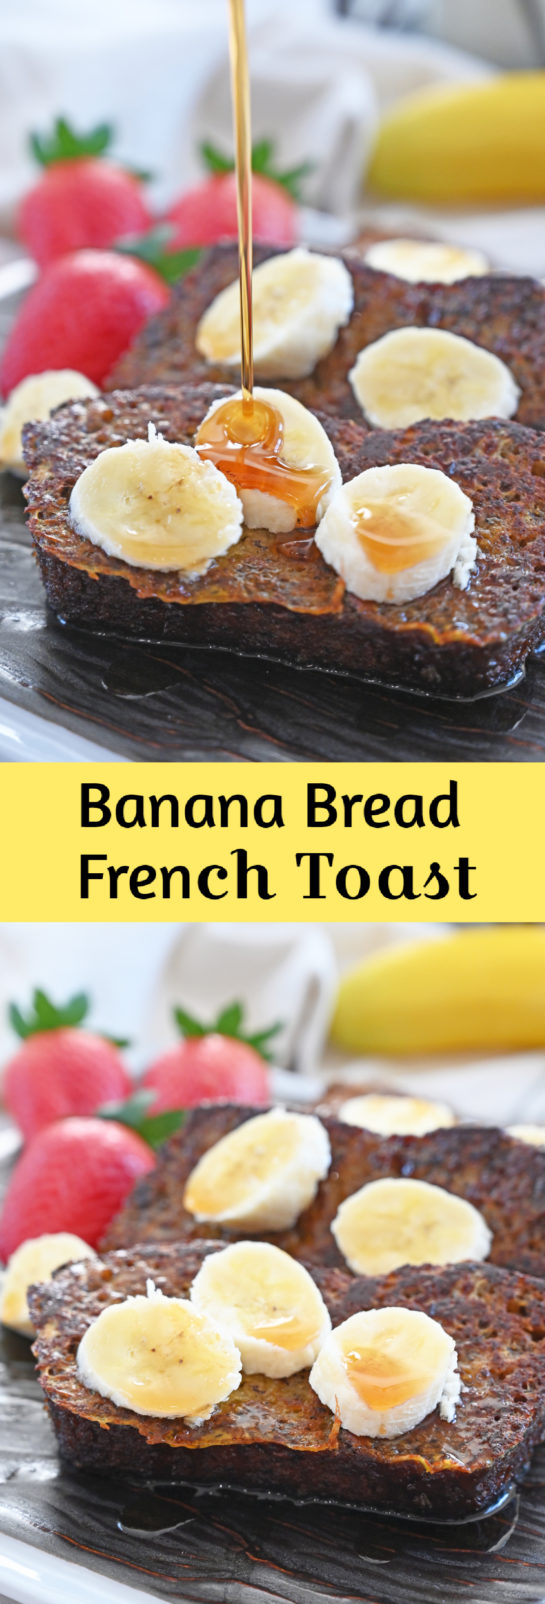 Easy Banana Bread French Toast recipe is a great breakfast/brunch for preparing ahead and it’s loaded with banana flavor! No need to wait for the weekend to enjoy French toast when you can cook up this irresistible banana breakfast!